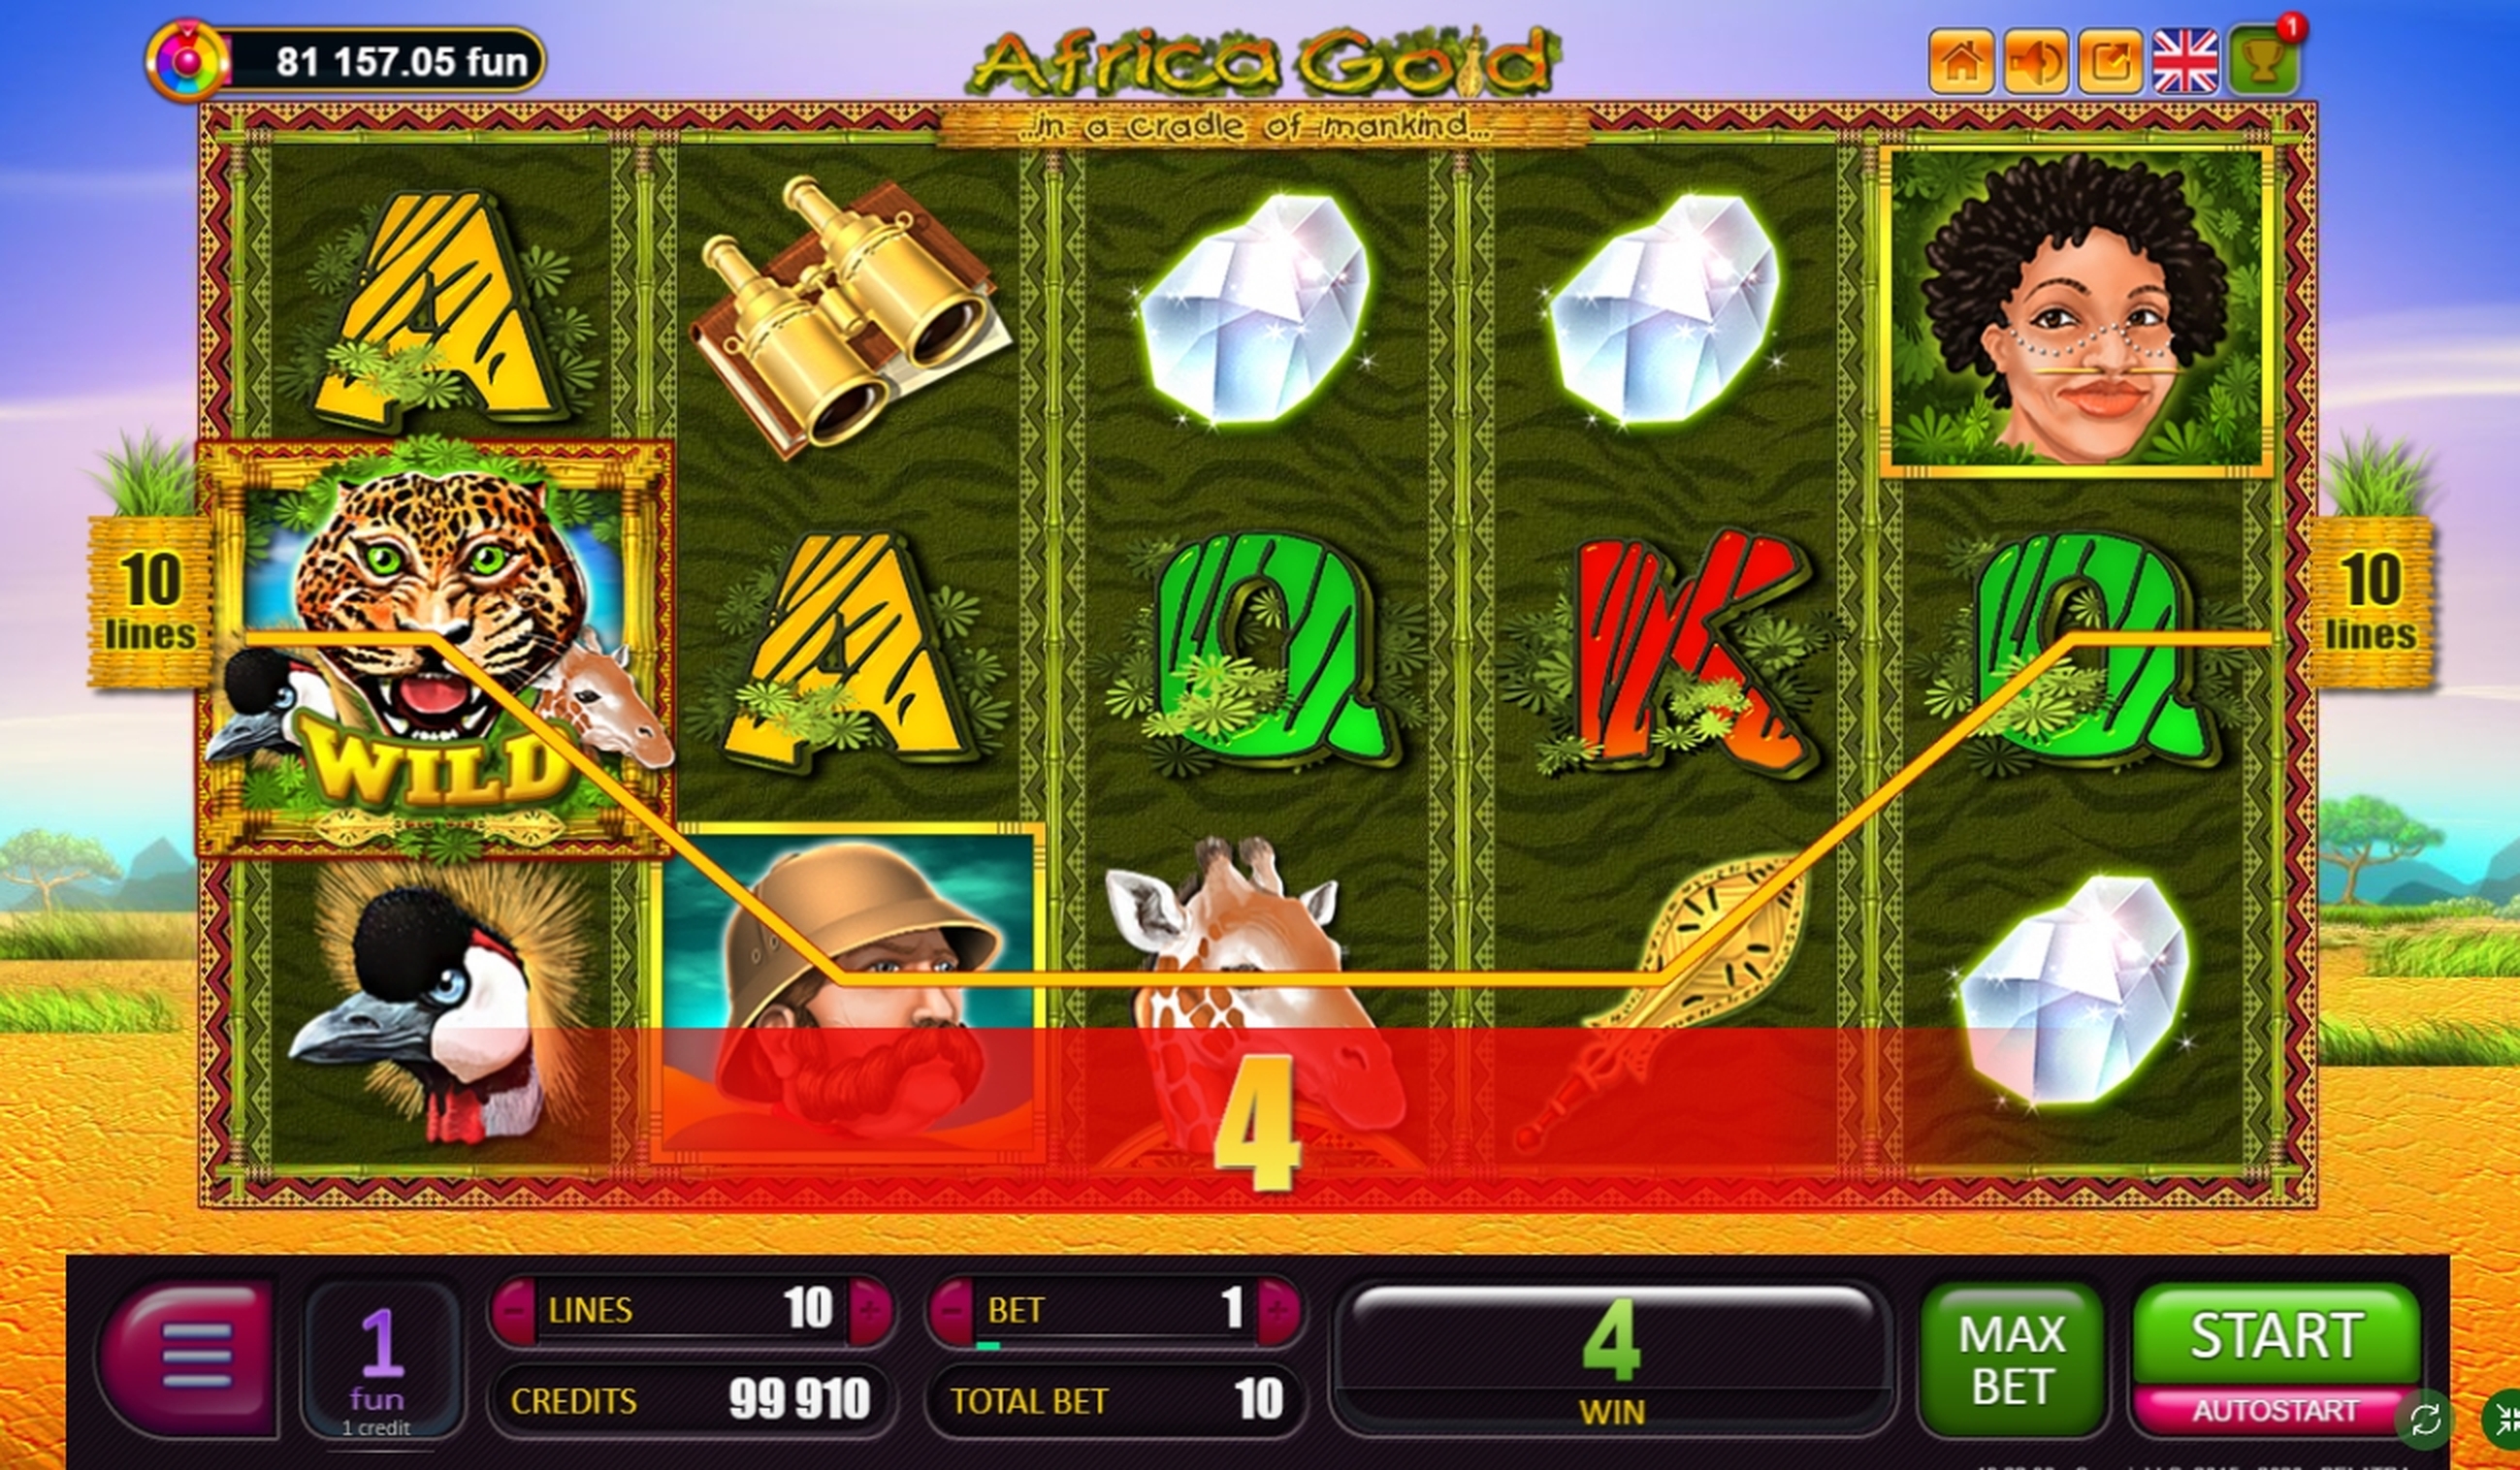 Win Money in Africa Gold Free Slot Game by Belatra Games